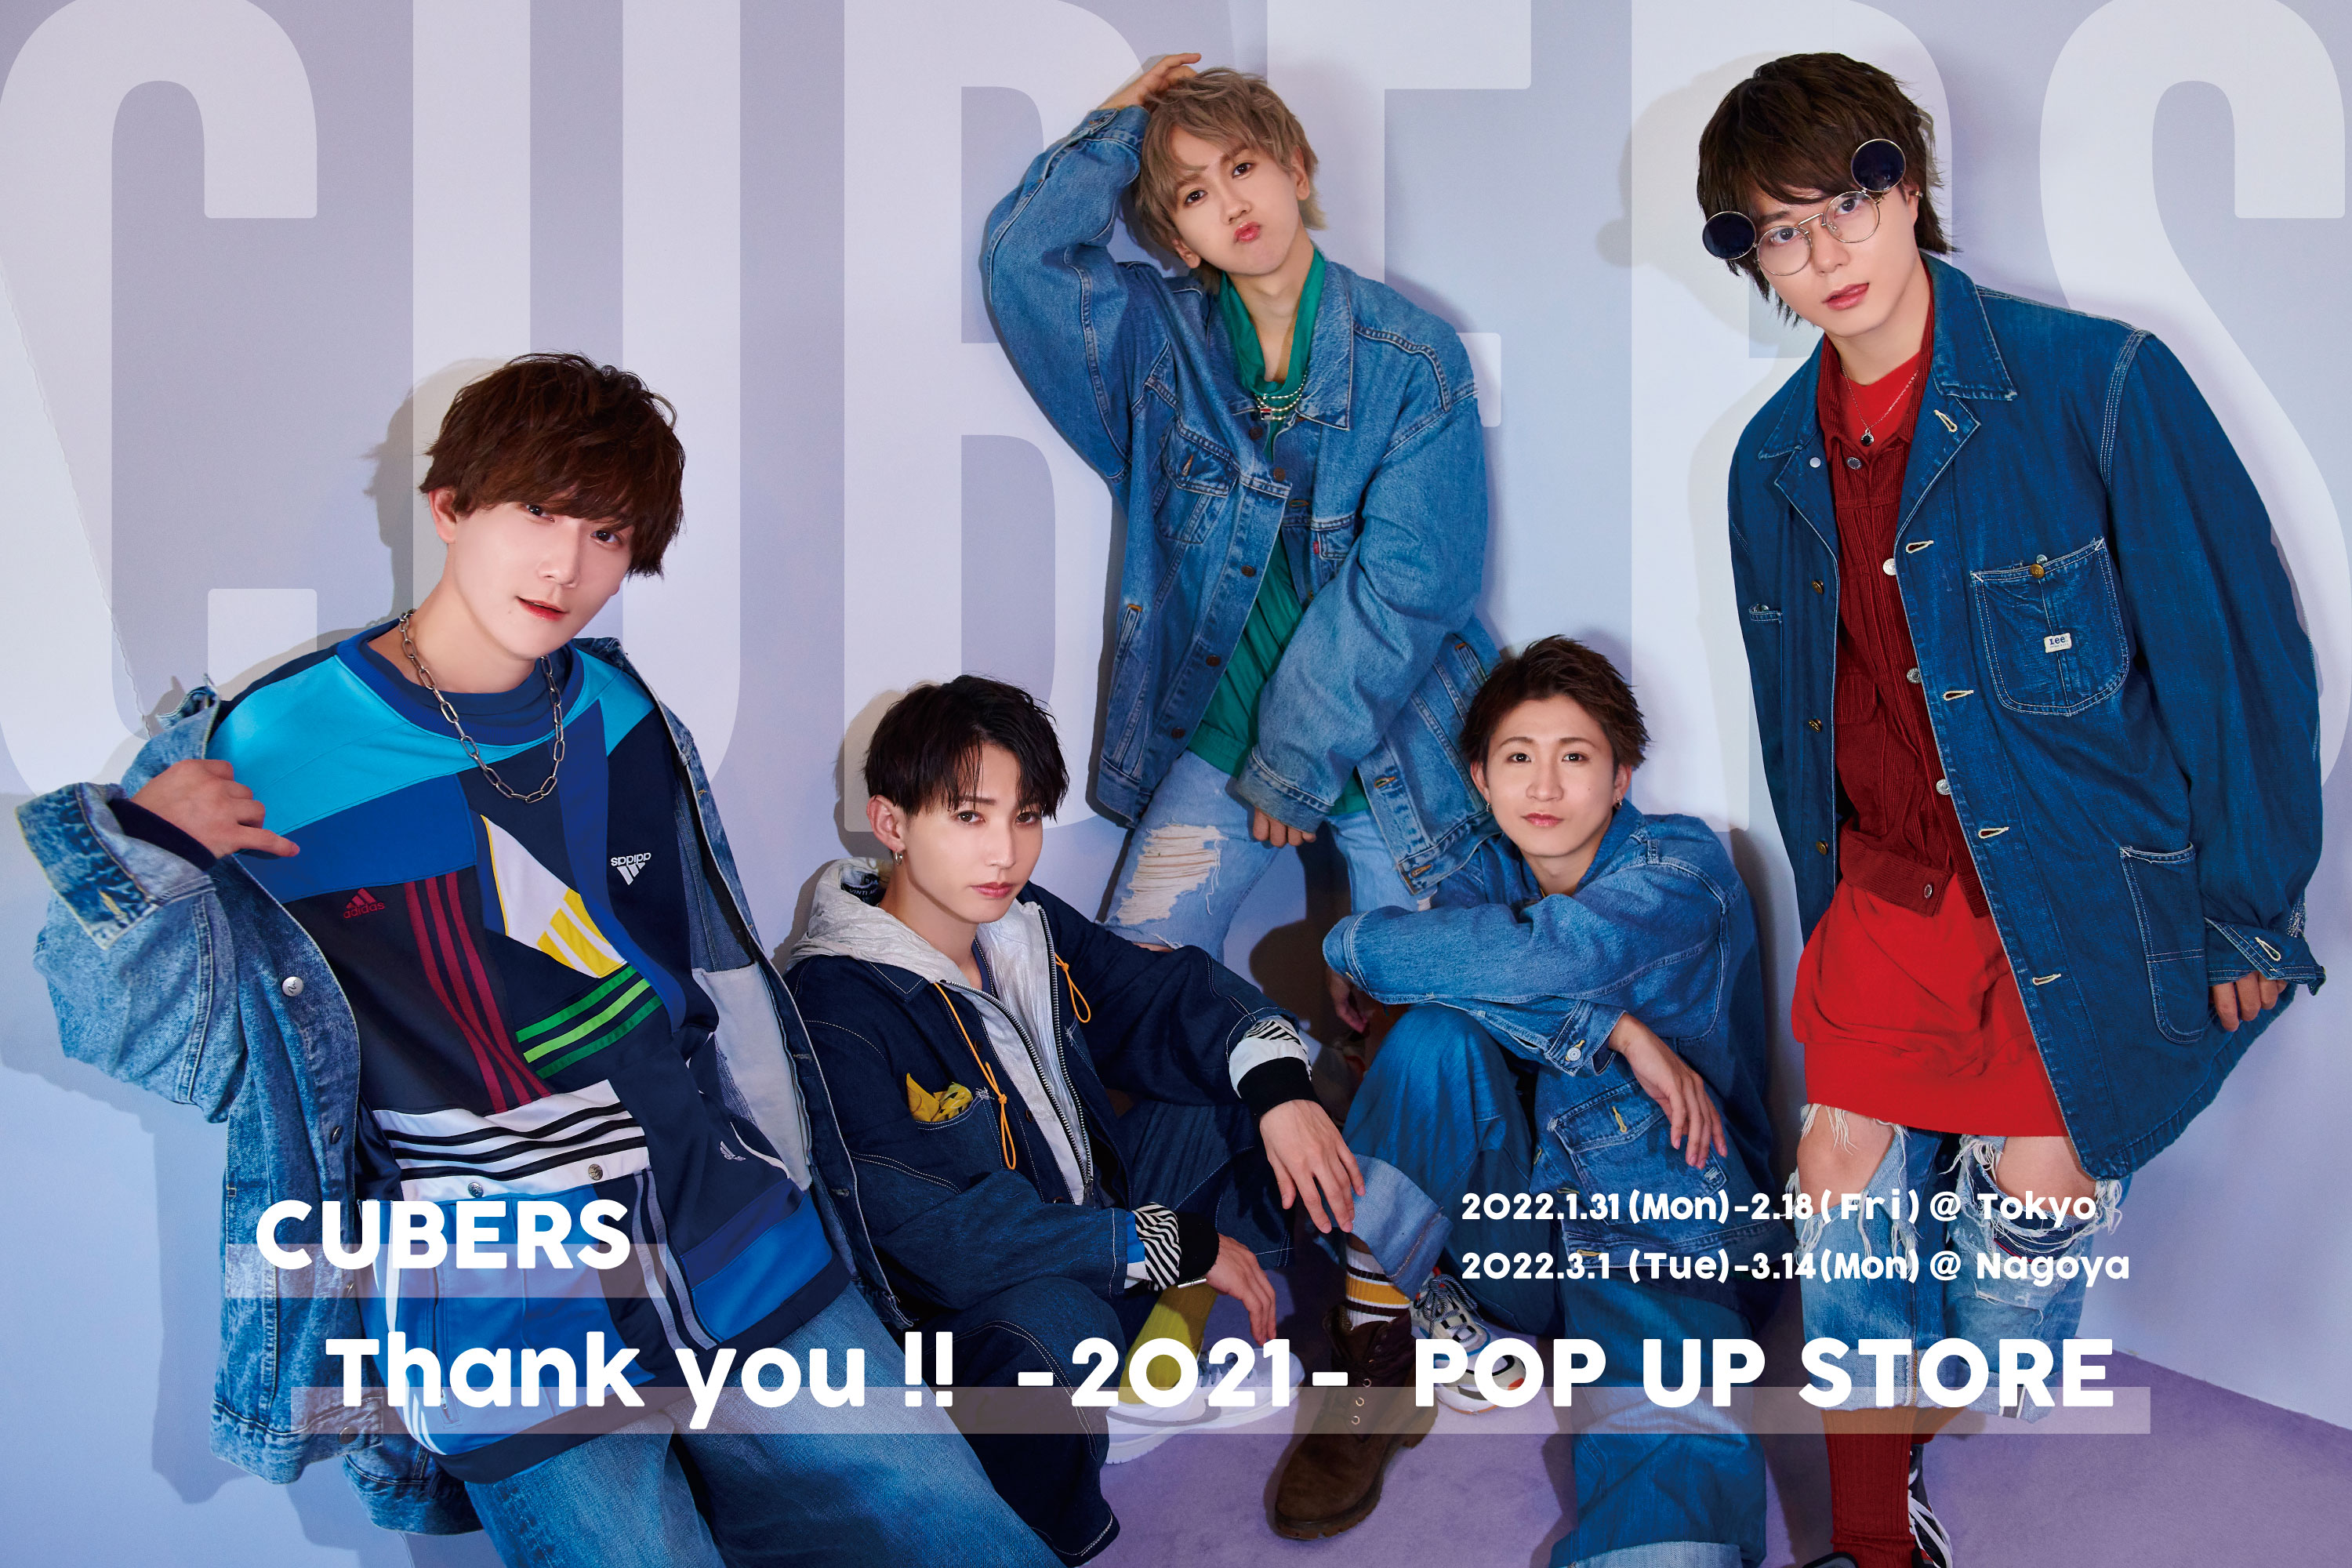 【NEWS】CUBERS初のPOP UP STORE「Thank you!! -2021- POP UP STORE」東京・名古屋で開催決定！